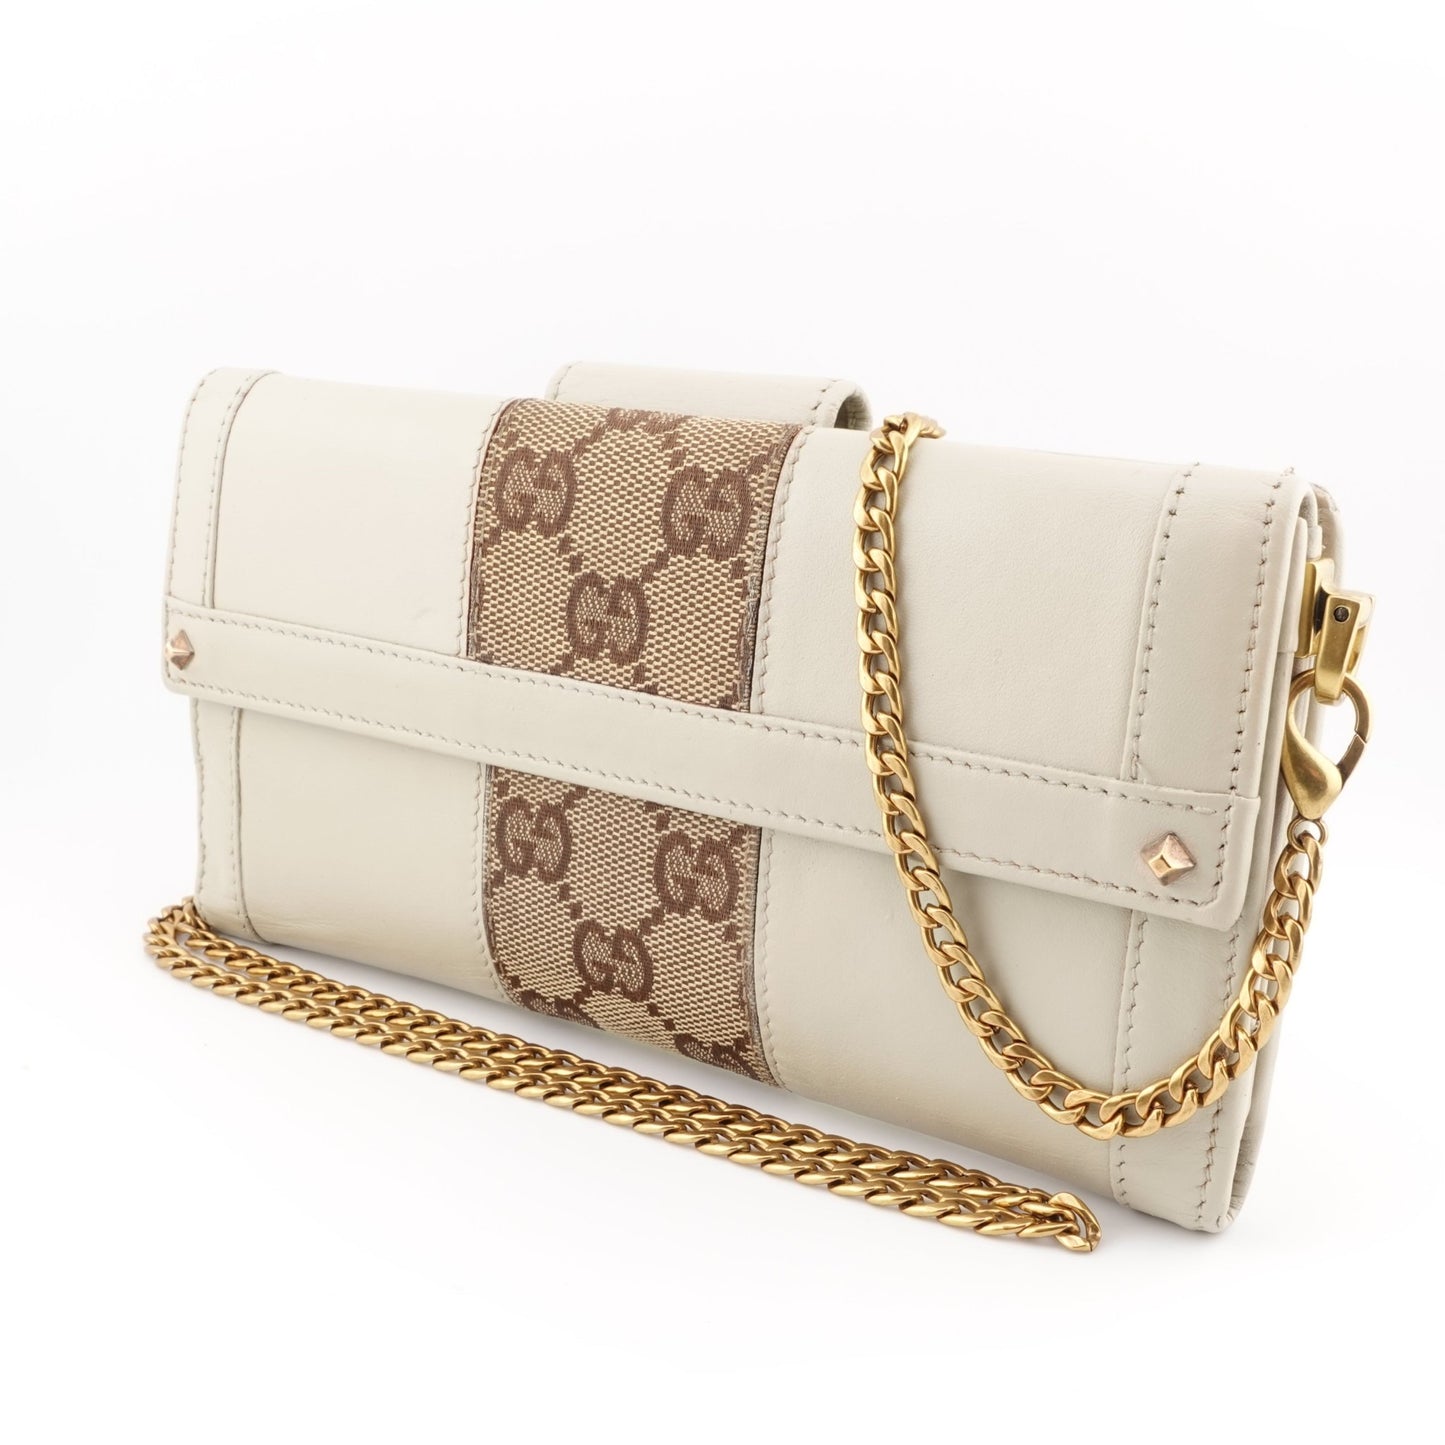 GUCCI Double Sided Leather Wallet On Chain - Bag Envy